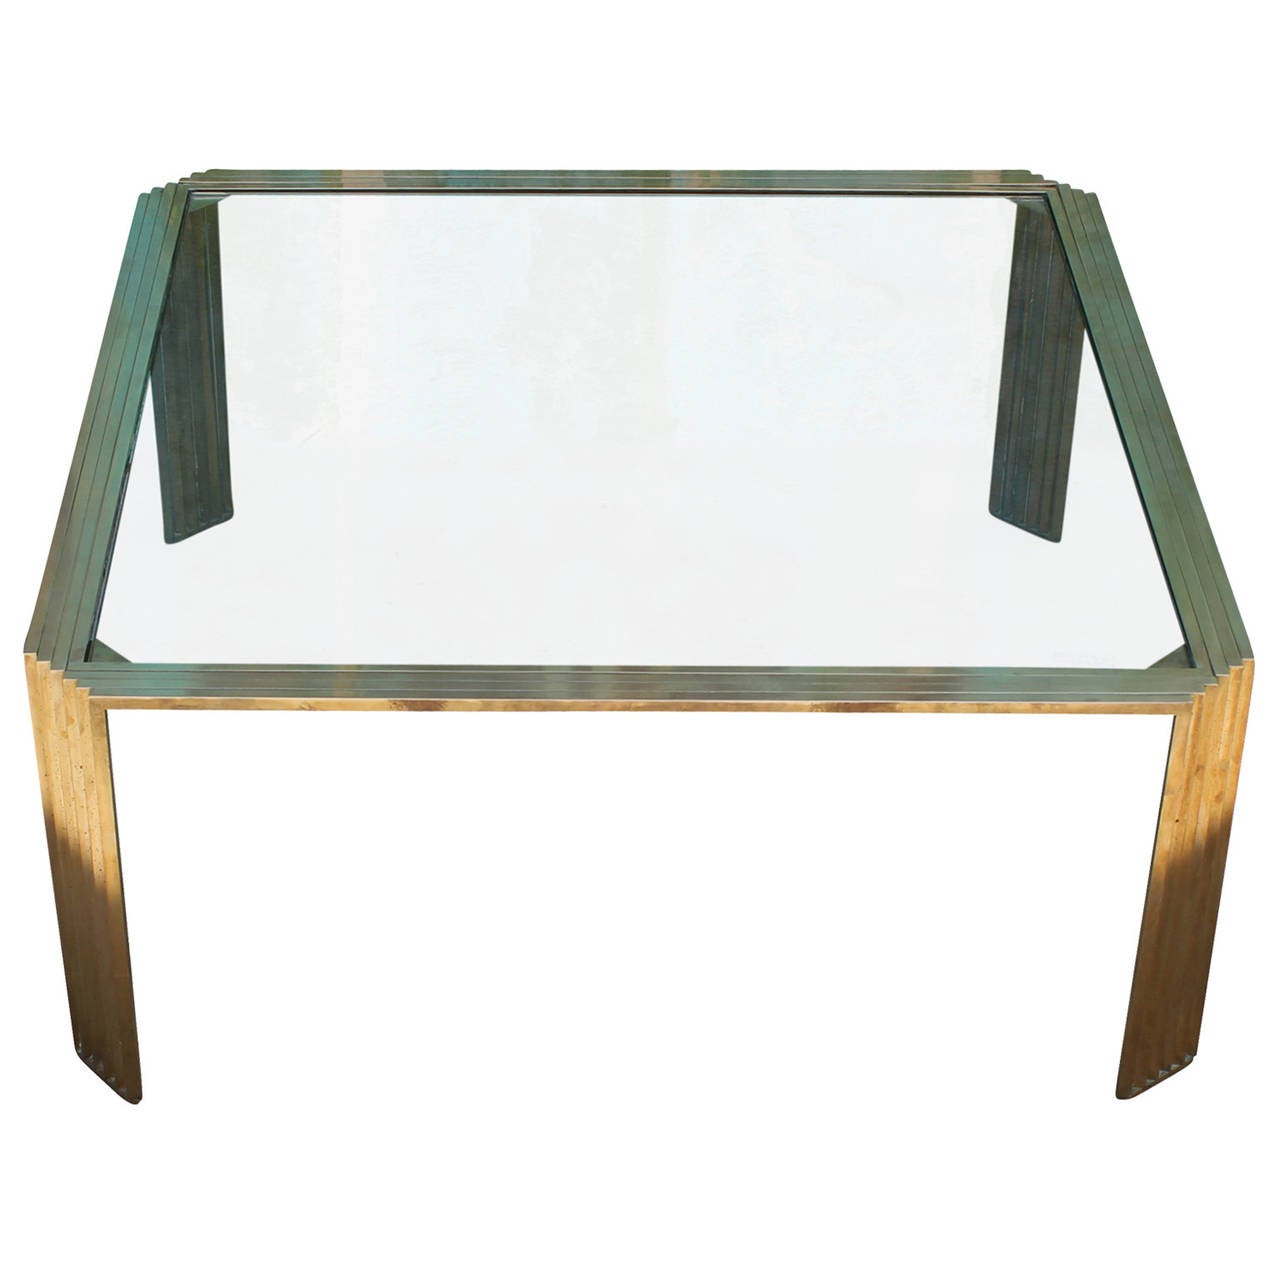 Italian Hollywood Regency Solid Brass Romeo Rega Style Square Table with Glass Top